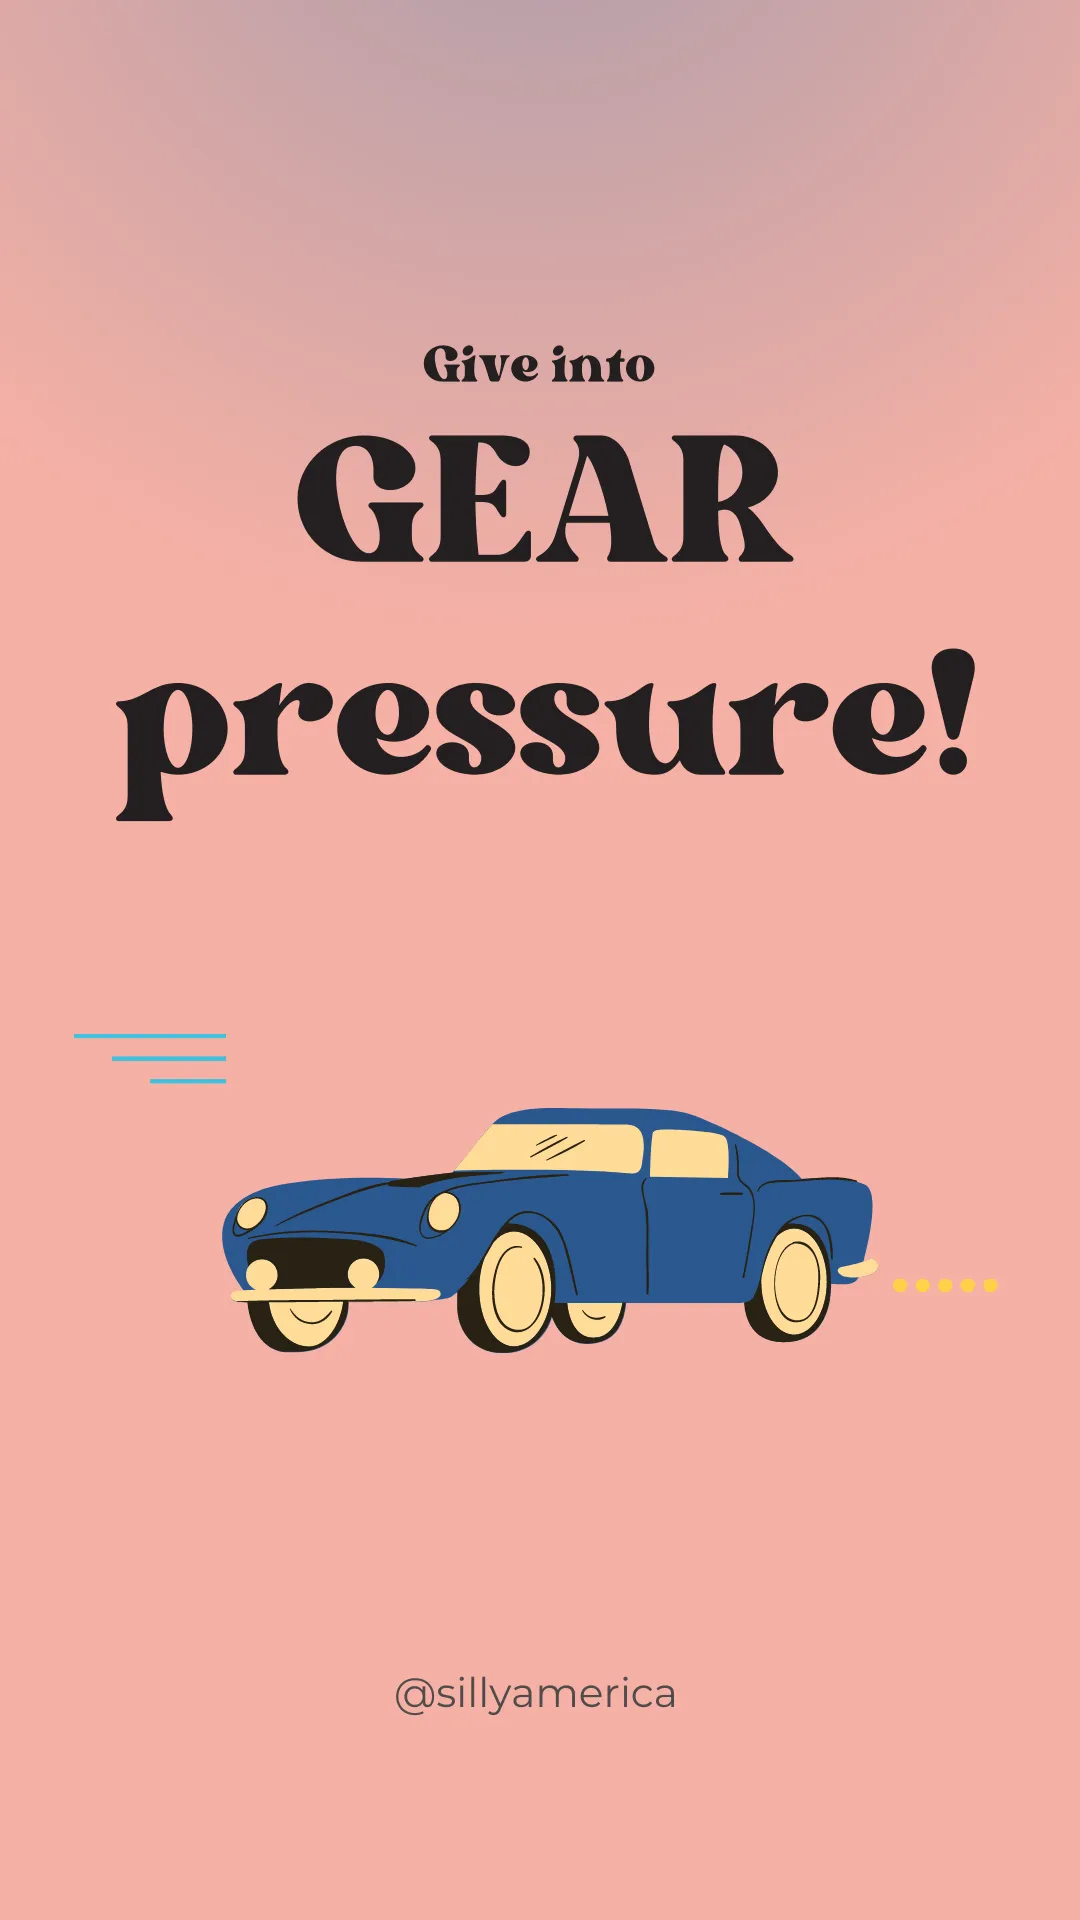 Give into GEAR pressure! - Road Trip Puns